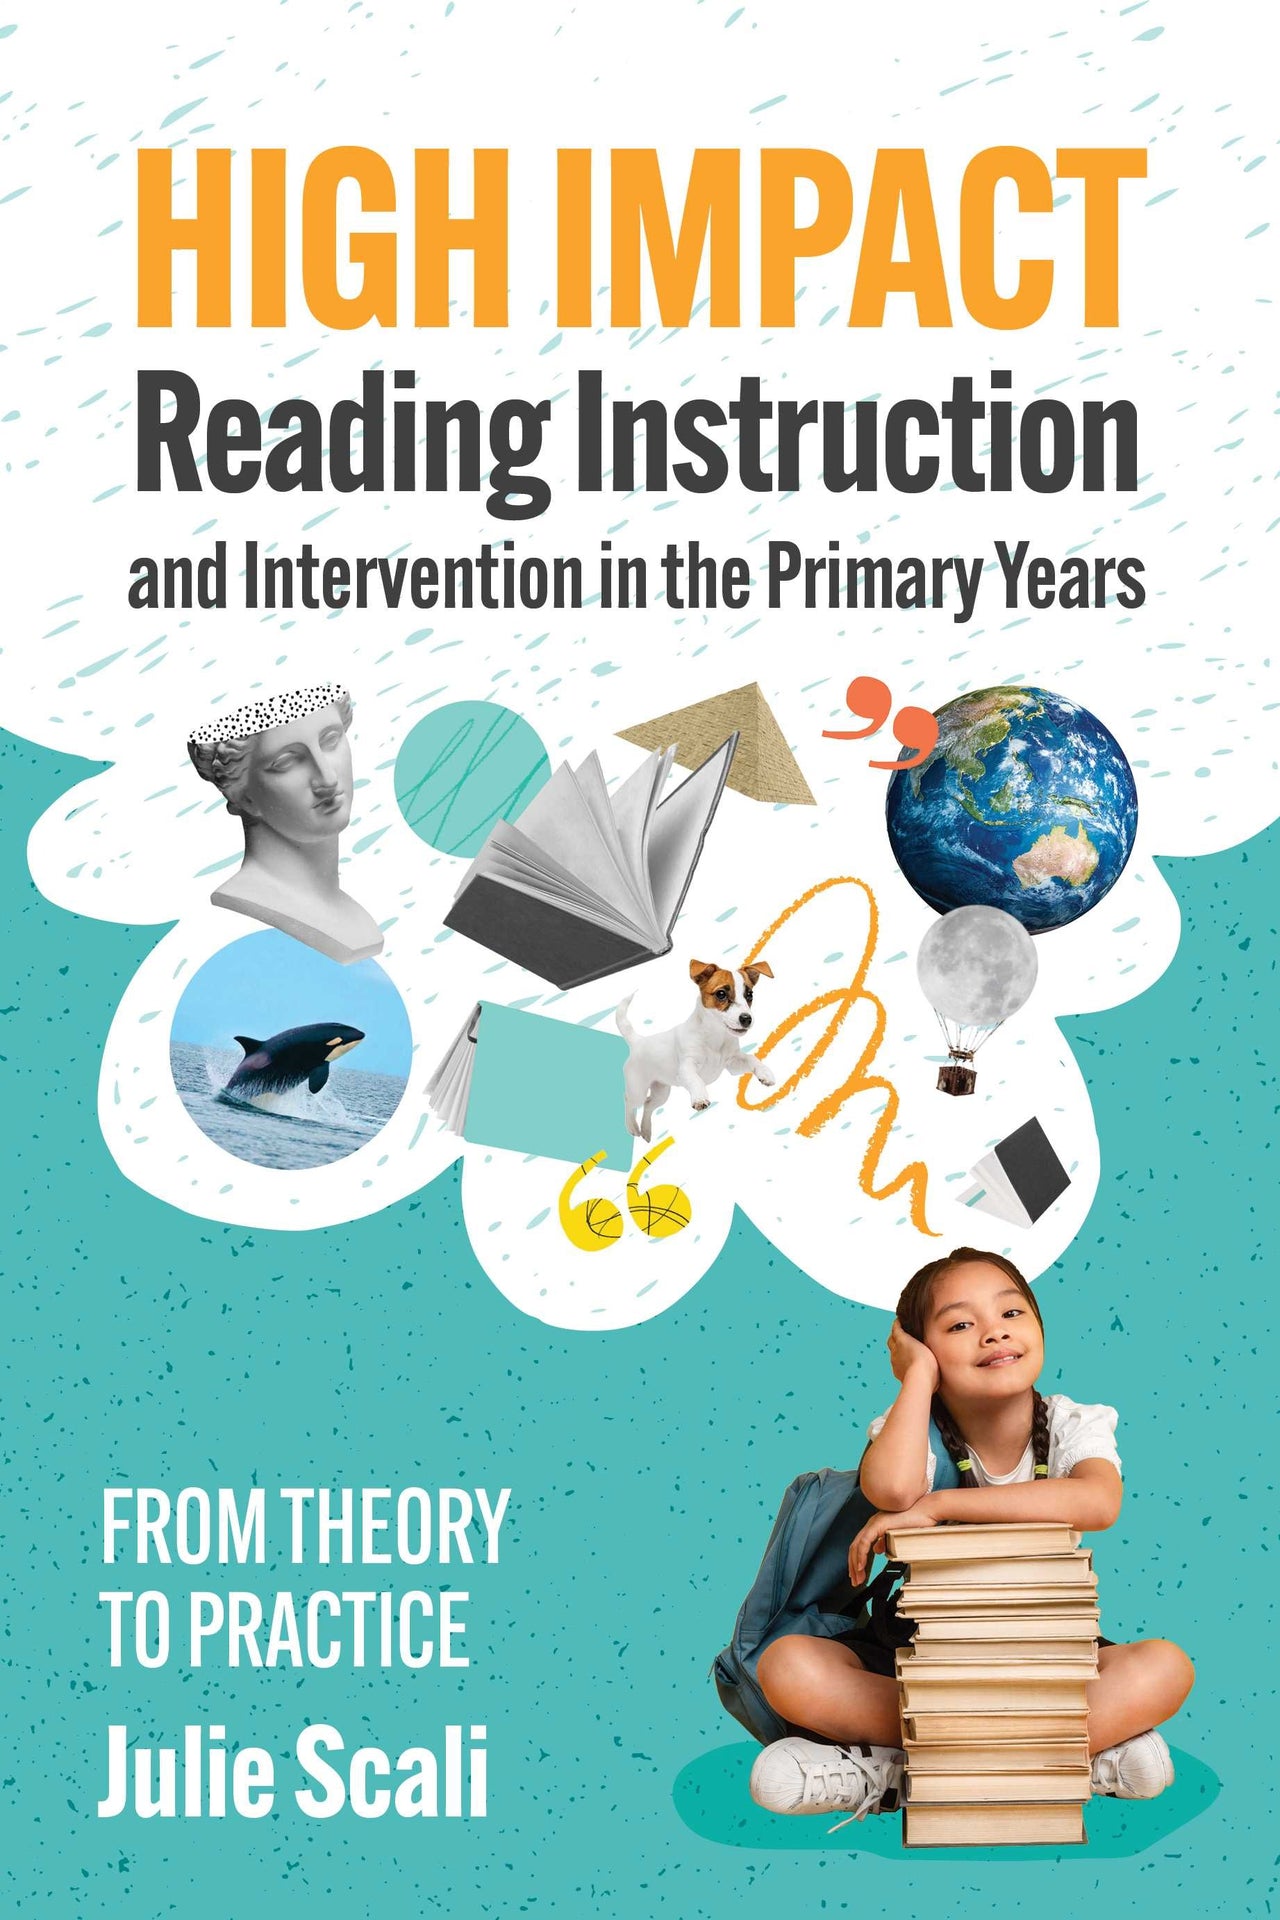 High Impact Reading Instruction and Intervention in the Primary Years